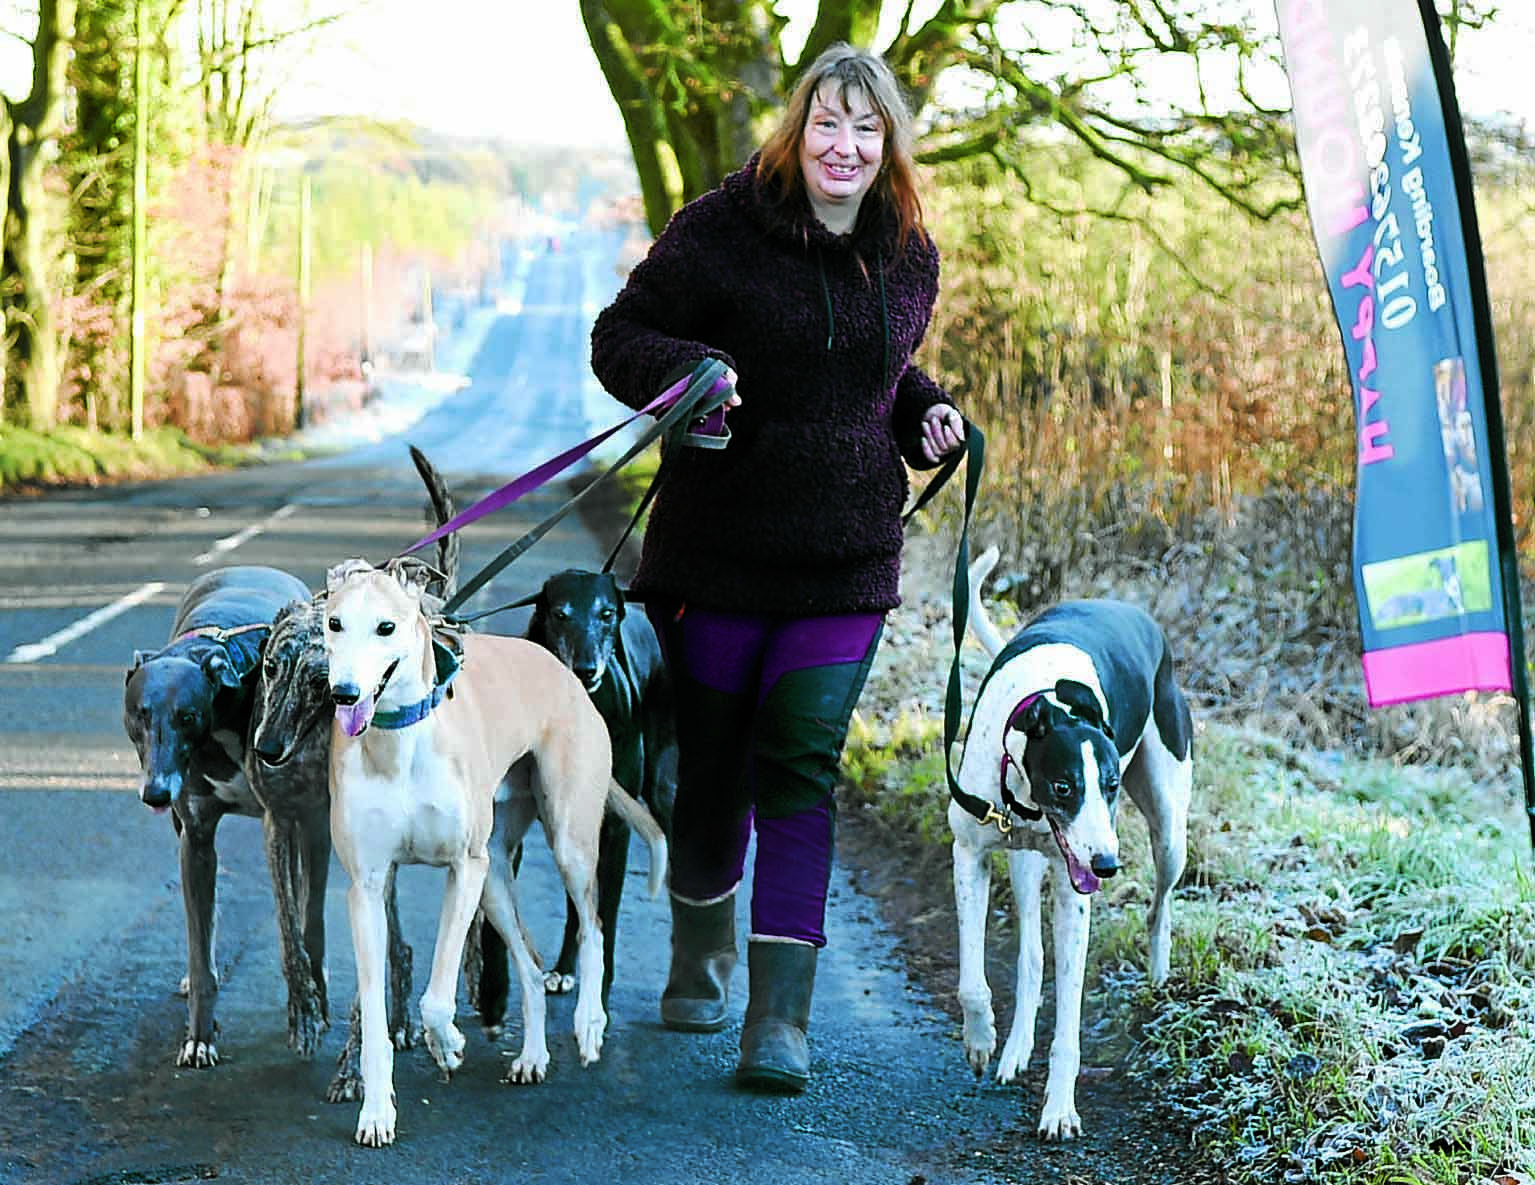 Mandy's mission to rehome hounds